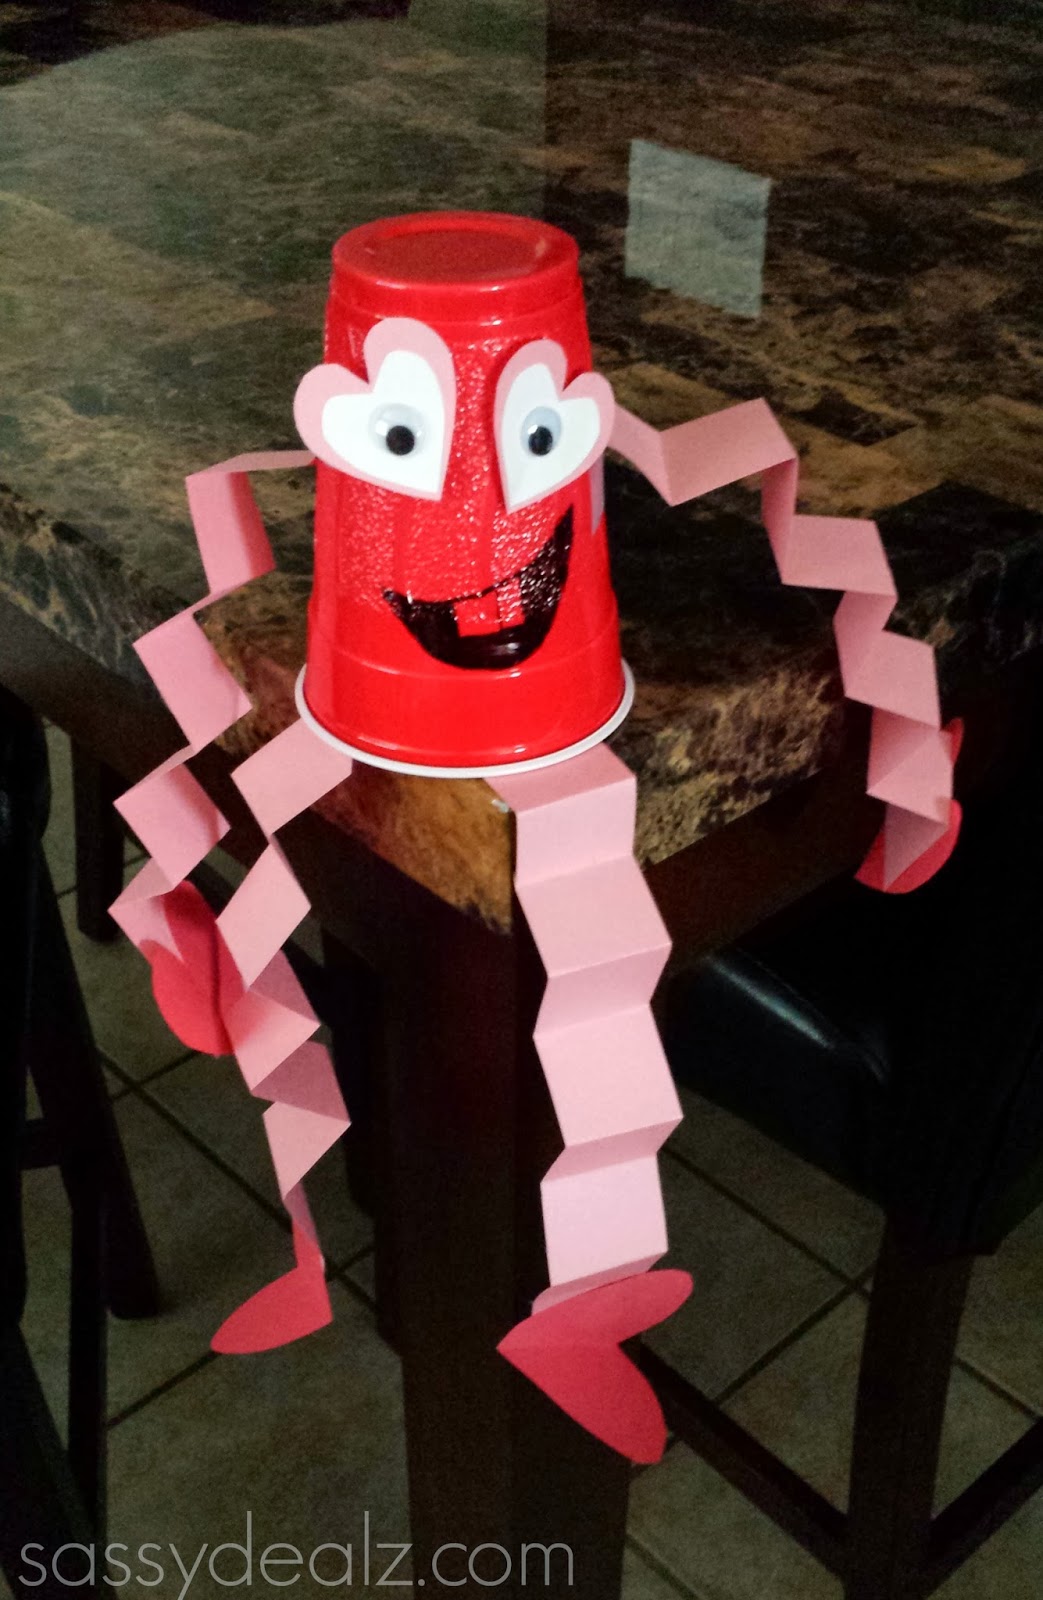 Red Solo Cup Valentine's Day Craft For Kids {Heart Man}